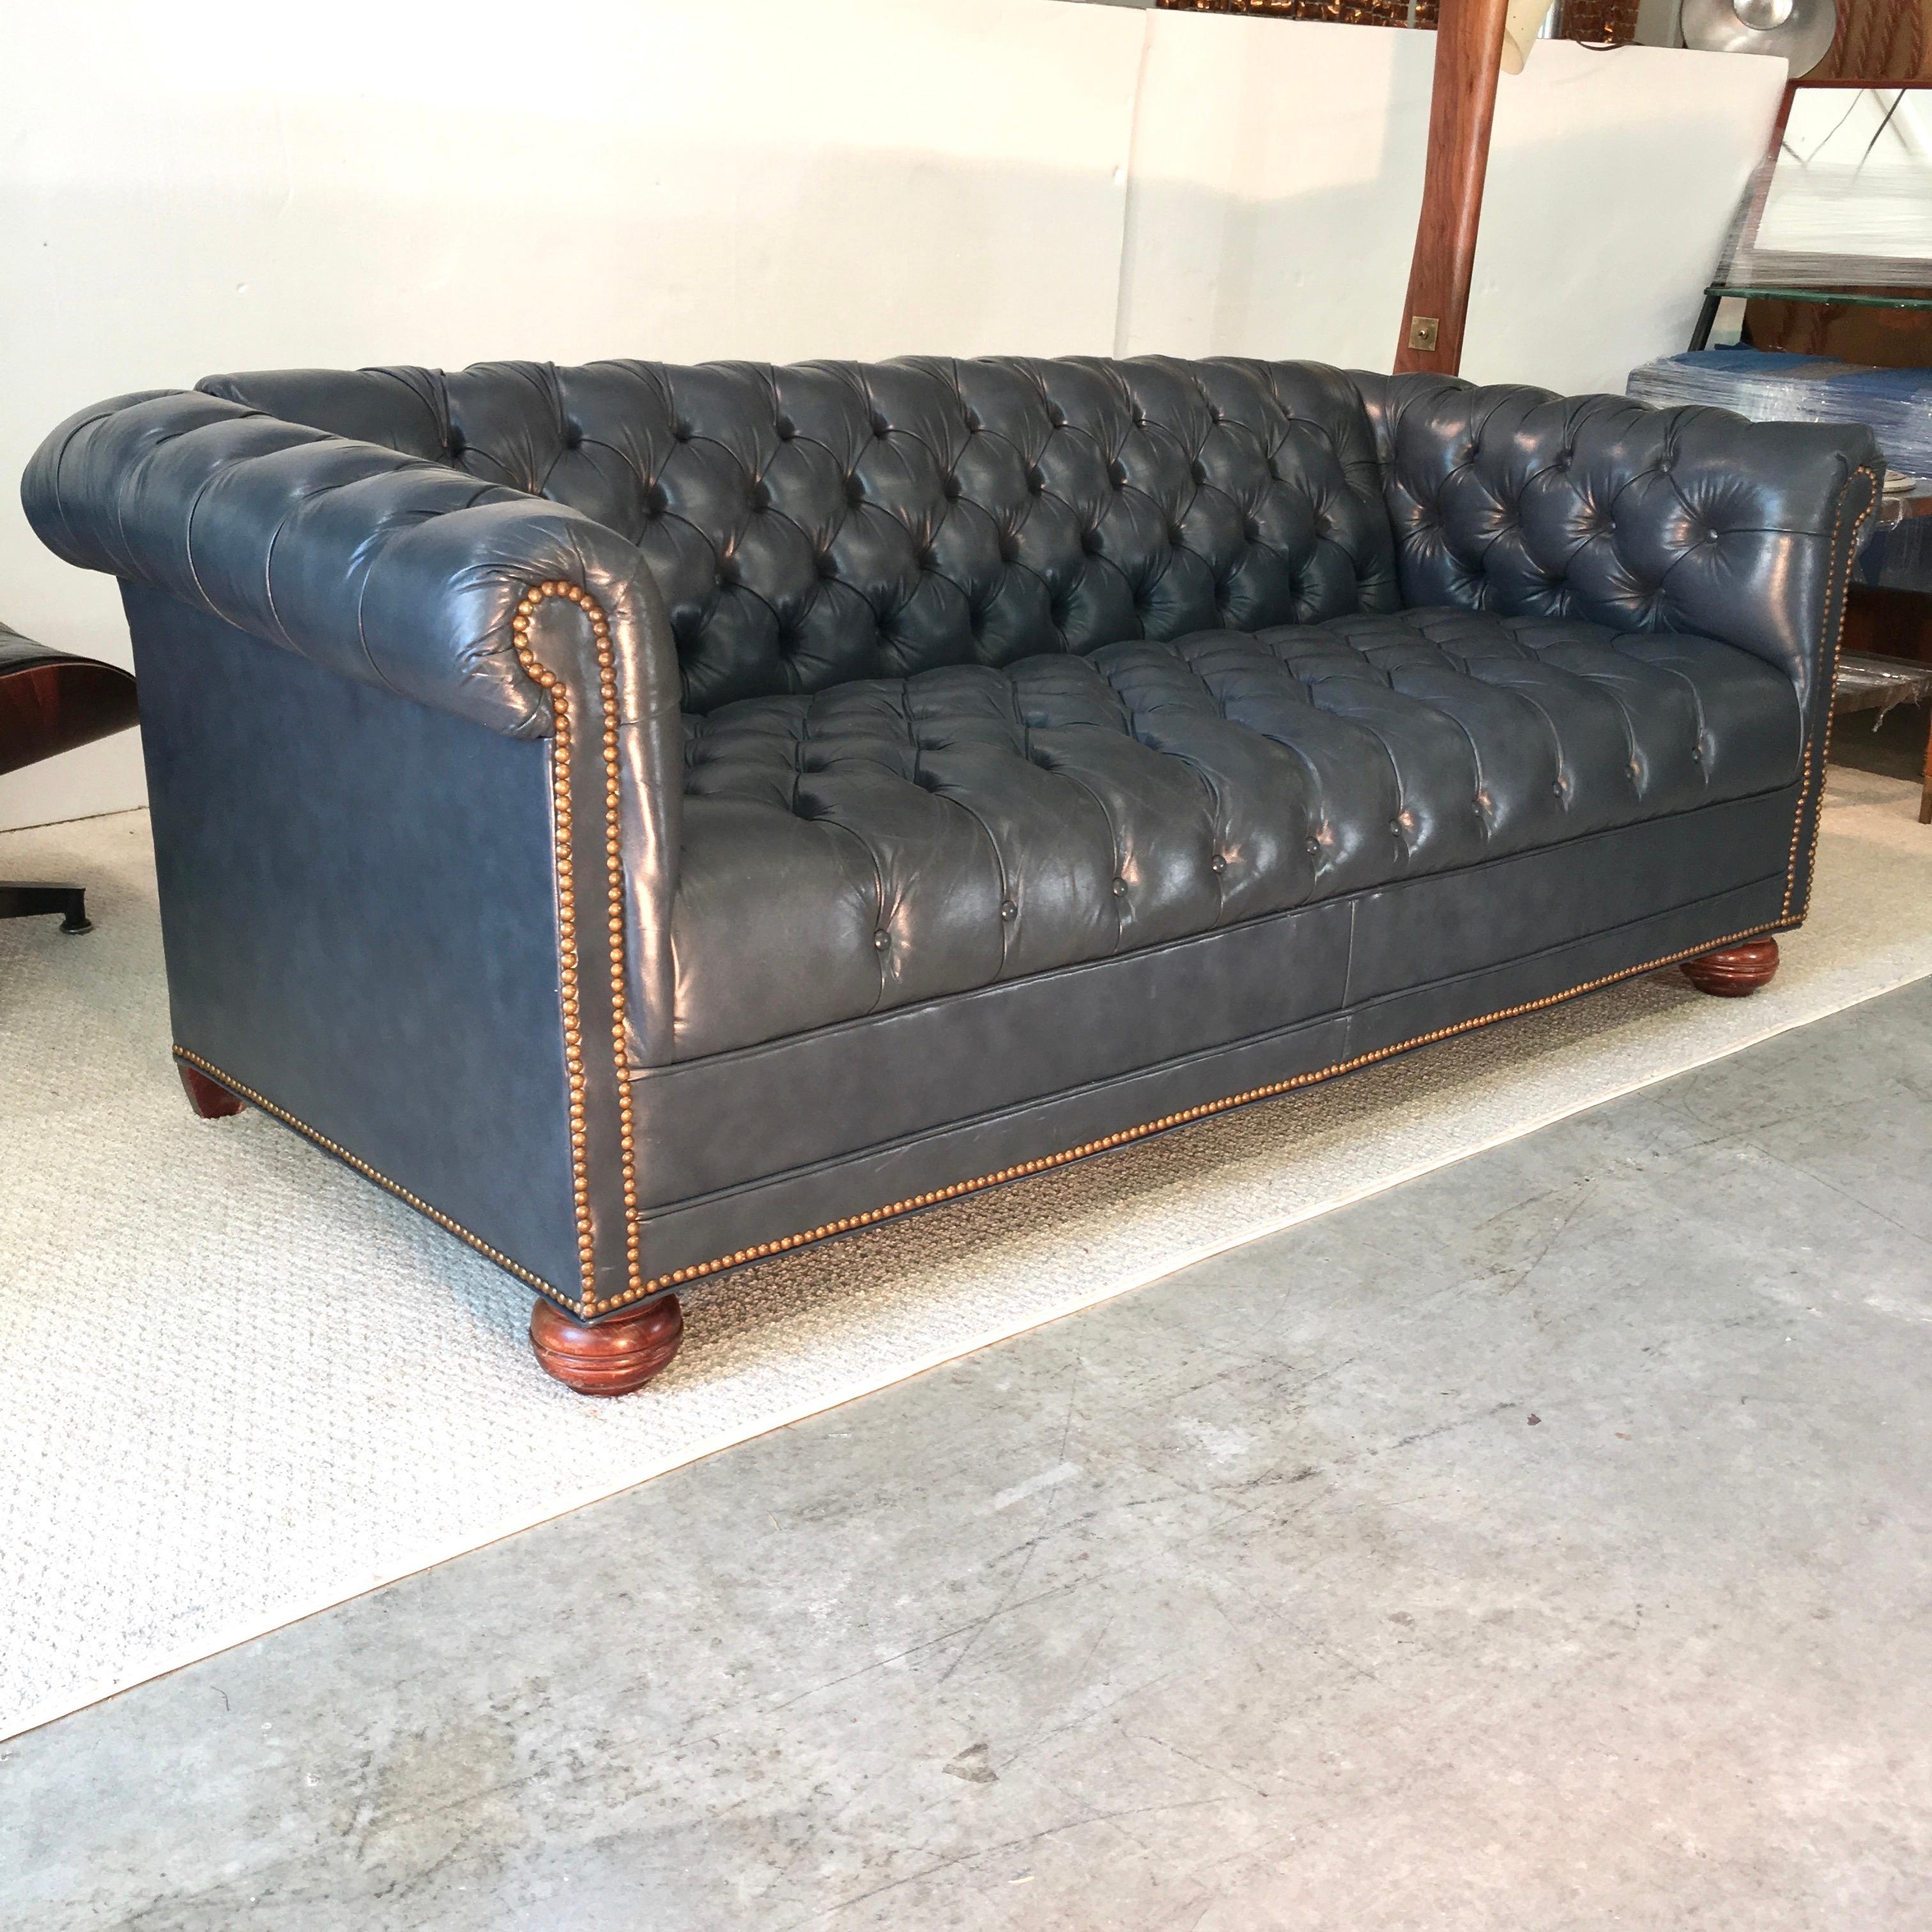 1970s vintage chesterfield sofa in tufted high grade slate blue/gray leather and brass nailhead trim and a fixed tufted seat base. Sits on solid wood bun feet in front and tapered block in the rear. 21 inch seat depth. Very clean and ready to